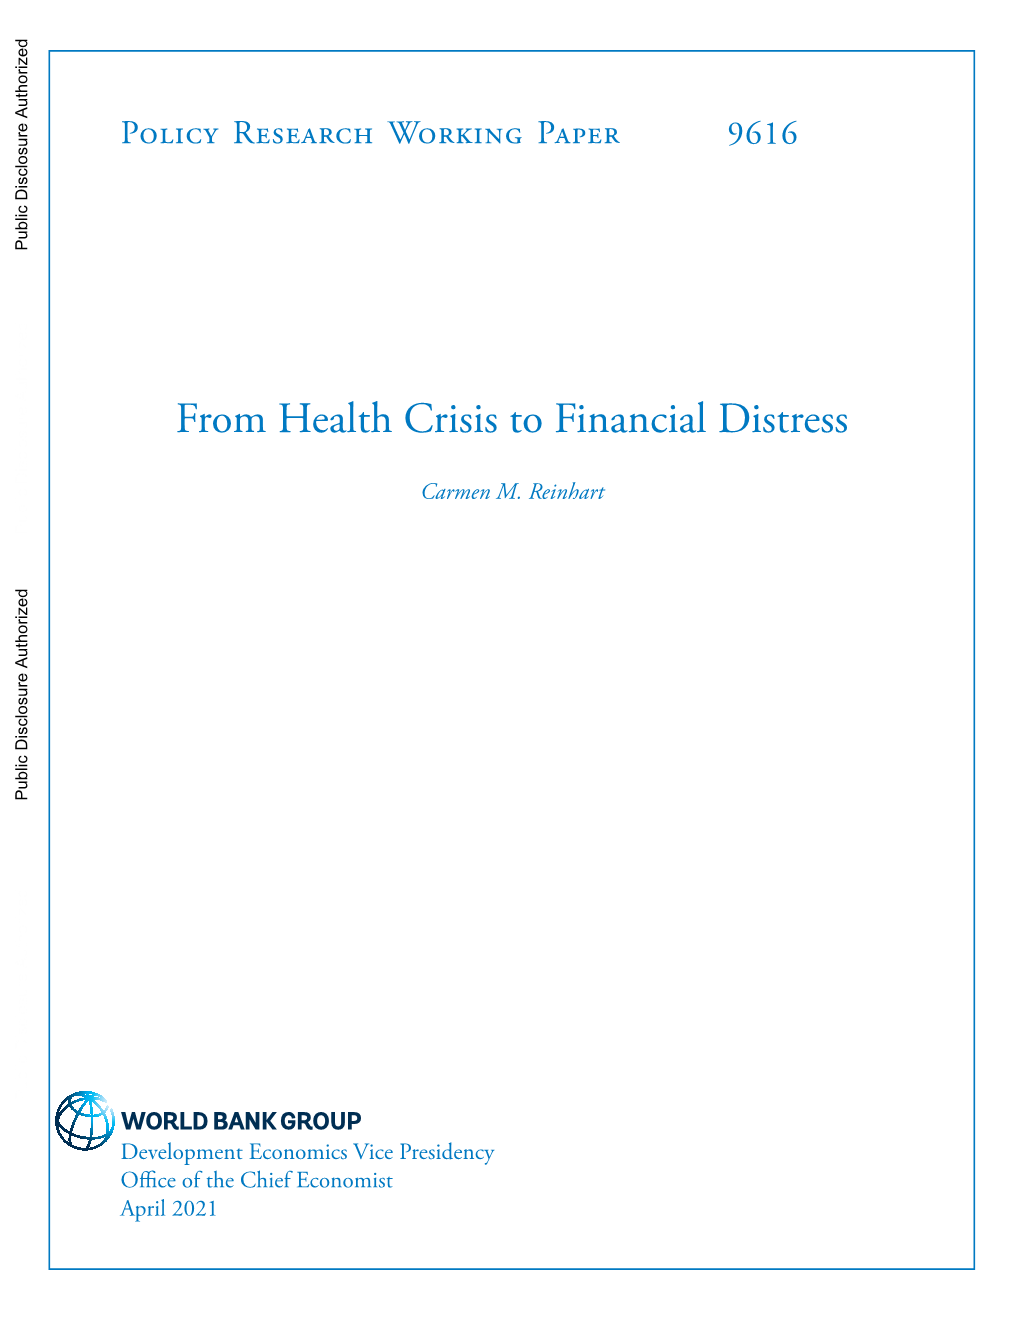 From Health Crisis to Financial Distress